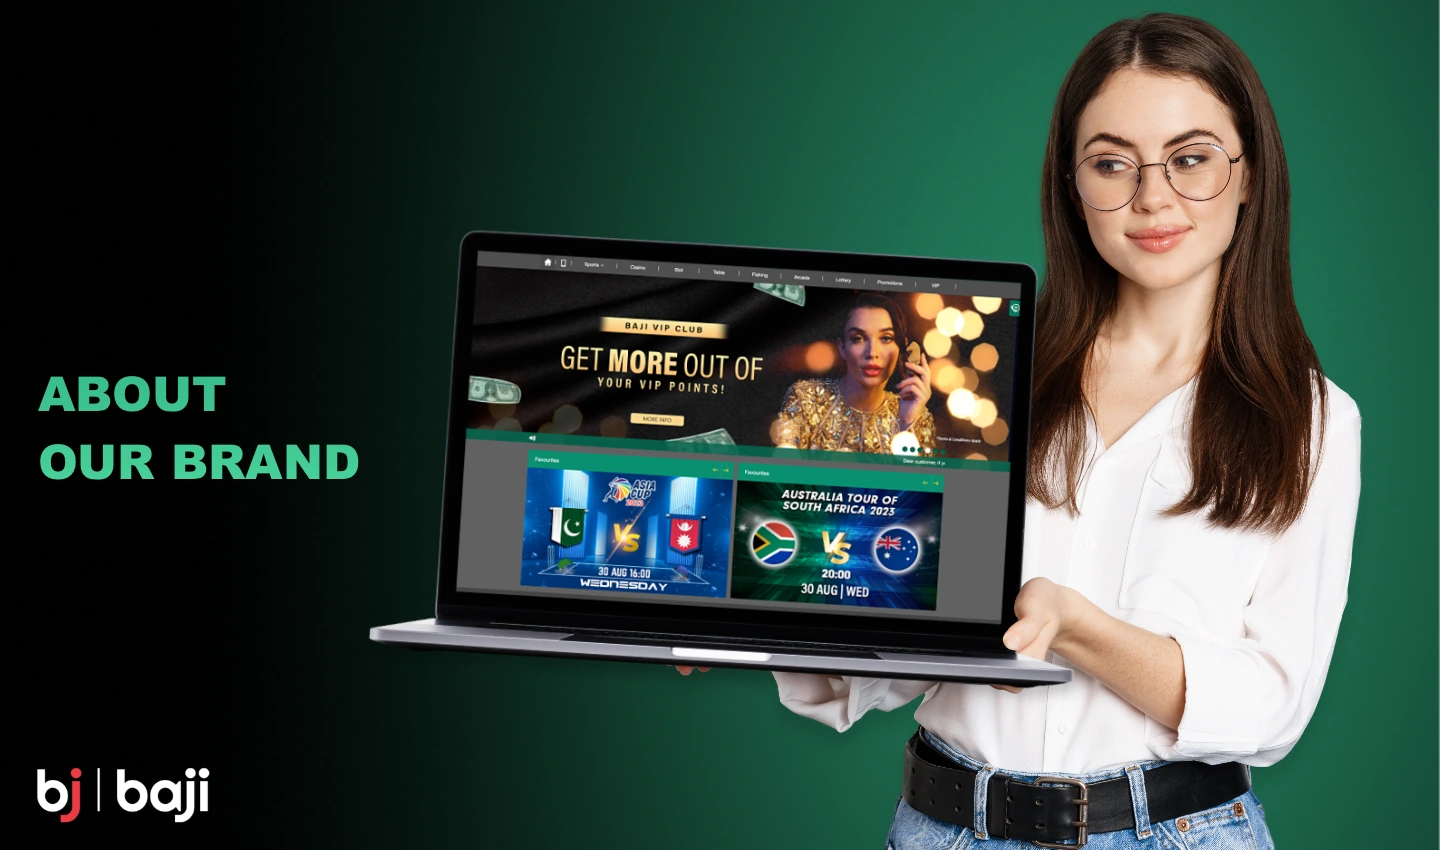 Baji is a well-known brand that offers its users the ability to bet on sports and play casino games